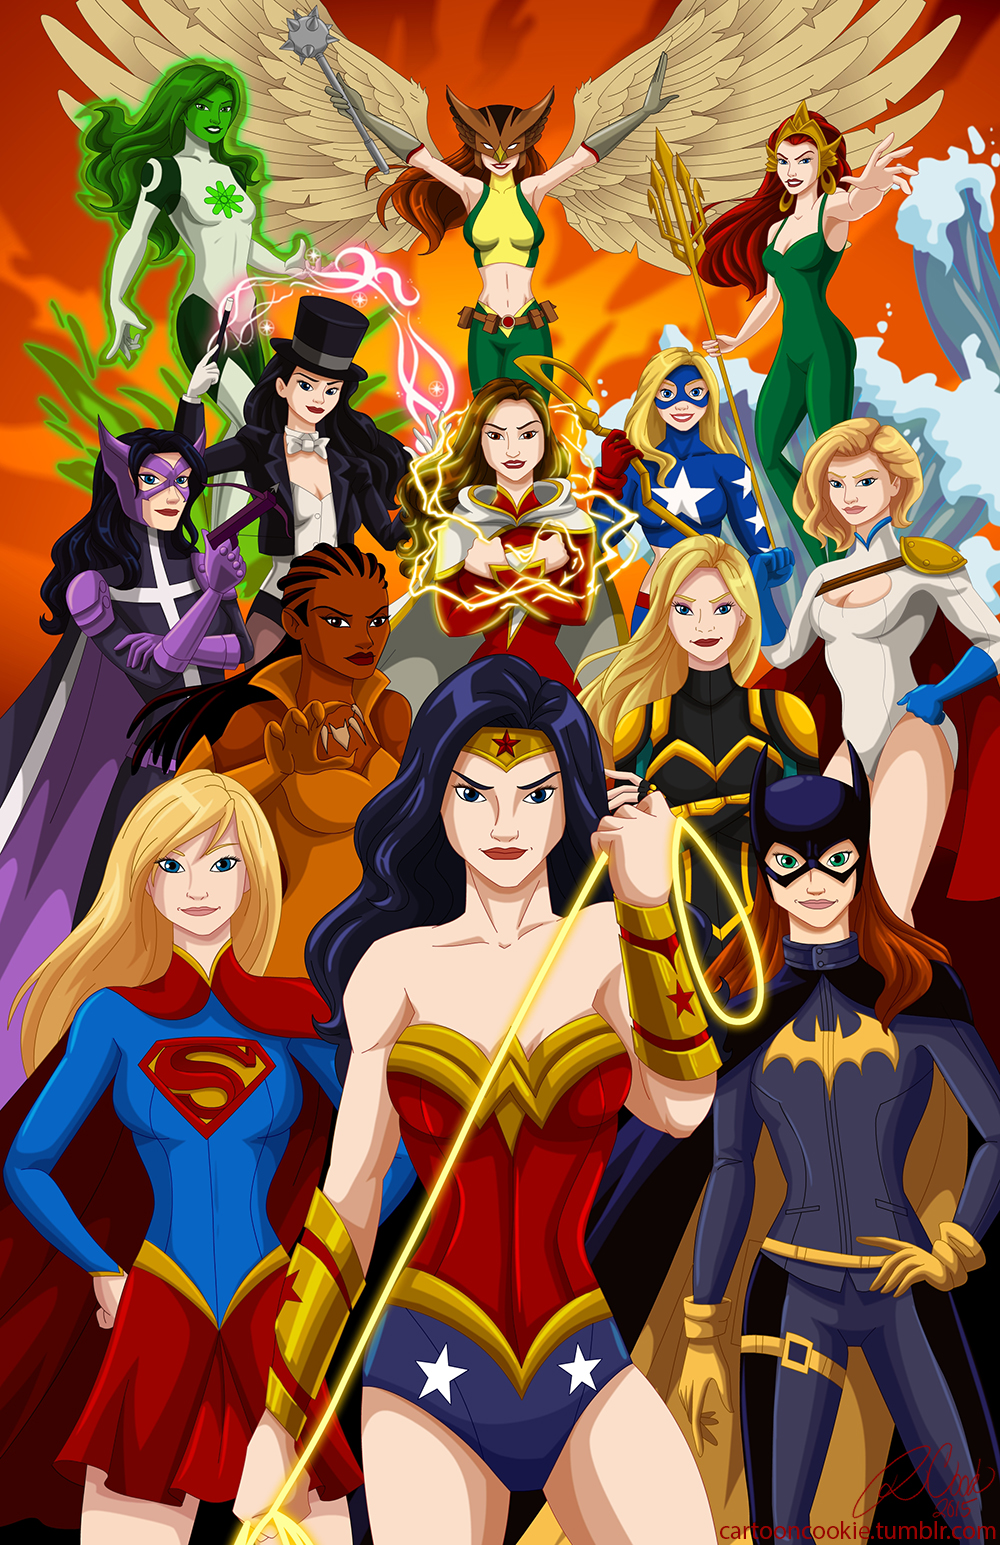 6+girls amazon arm arm_up armor arms_up barbara_gordon bare_legs bare_shoulders batgirl black_canary black_hair blonde_hair blue_eyes blue_gloves bodysuit bow bow_(weapon) bowtie bracelet braids breasts brown_hair cape claws cleavage cleavage_cutout collarbone courtney_whitmore crossbow dark_skin dc_comics detached_collar everyone female flying gloves green_hair green_skin grey_gloves grin hand_on_hip hat hawkgirl holding huntress jade_(dc) jewelry kryptonian legs leotard lips lipstick long_hair looking_at_viewer mace magic magician makeup mari_jiwe_mccabe mary_batson mask masquerade mera midriff multiple_girls navel neck necklace outstretched_arm pink_lipstick power_girl purple_gloves queen red_cape red_gloves red_lipstick red_skirt redhead s_shield short_hair single_spaulder skirt sleeveless smile spaulders standing stargirl strapless supergirl tiara top_hat trident turtleneck v-neck vixen_(dc) wand water weapon wonder_woman yellow_gloves zatanna_zatara